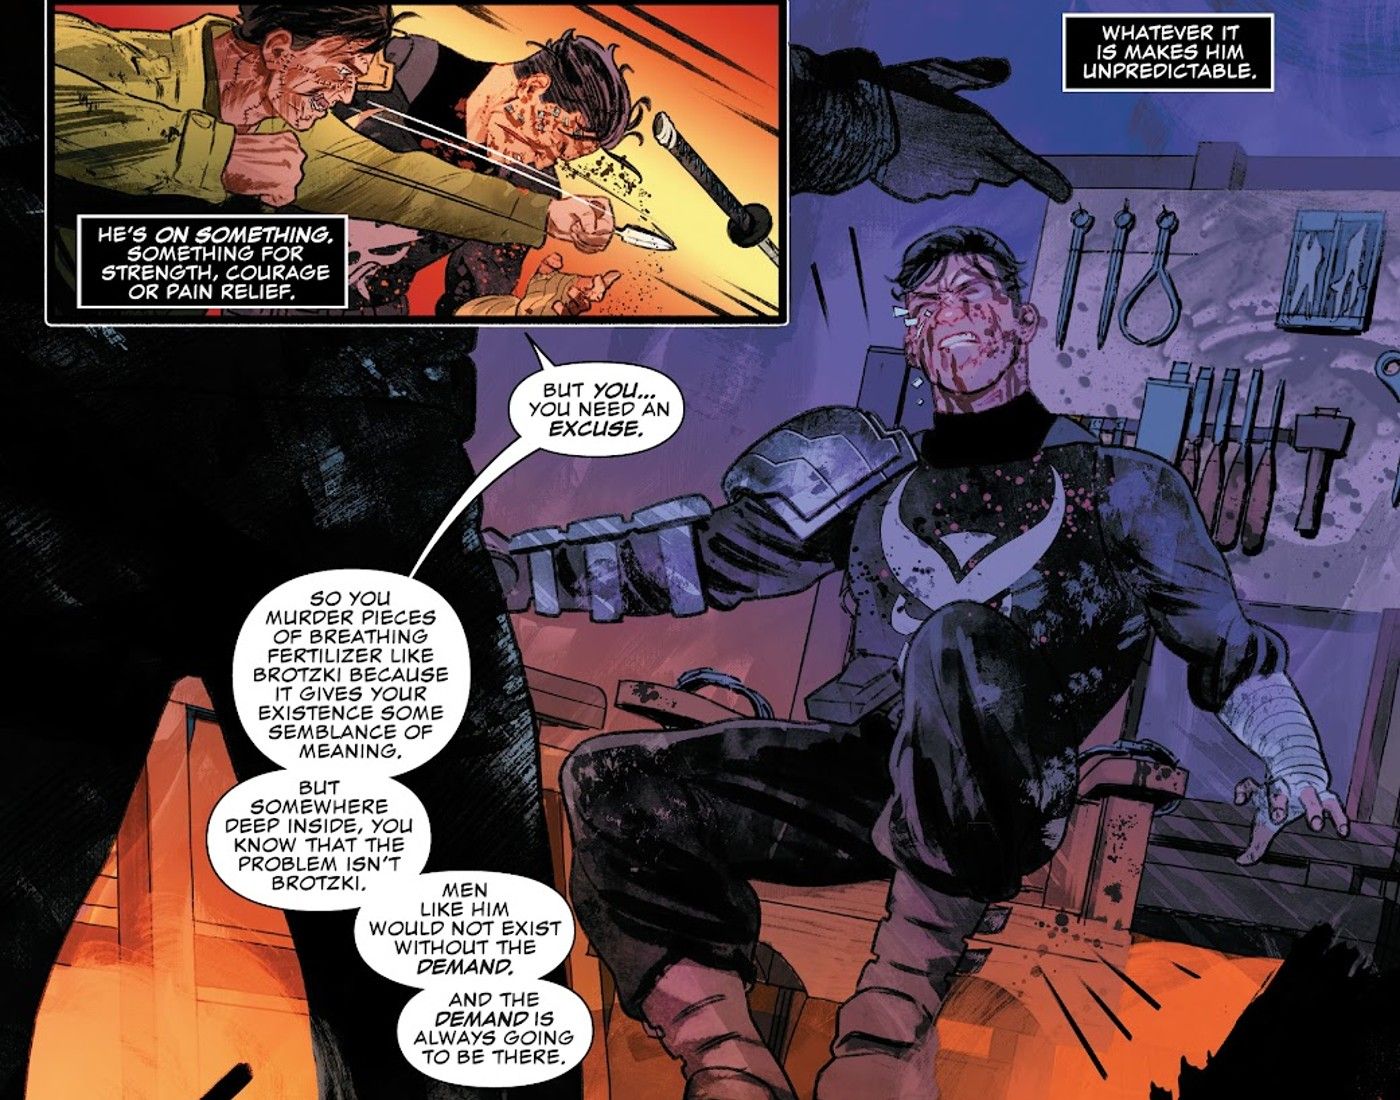 The Punisher & Batman Are More Alike Than Fans Realize